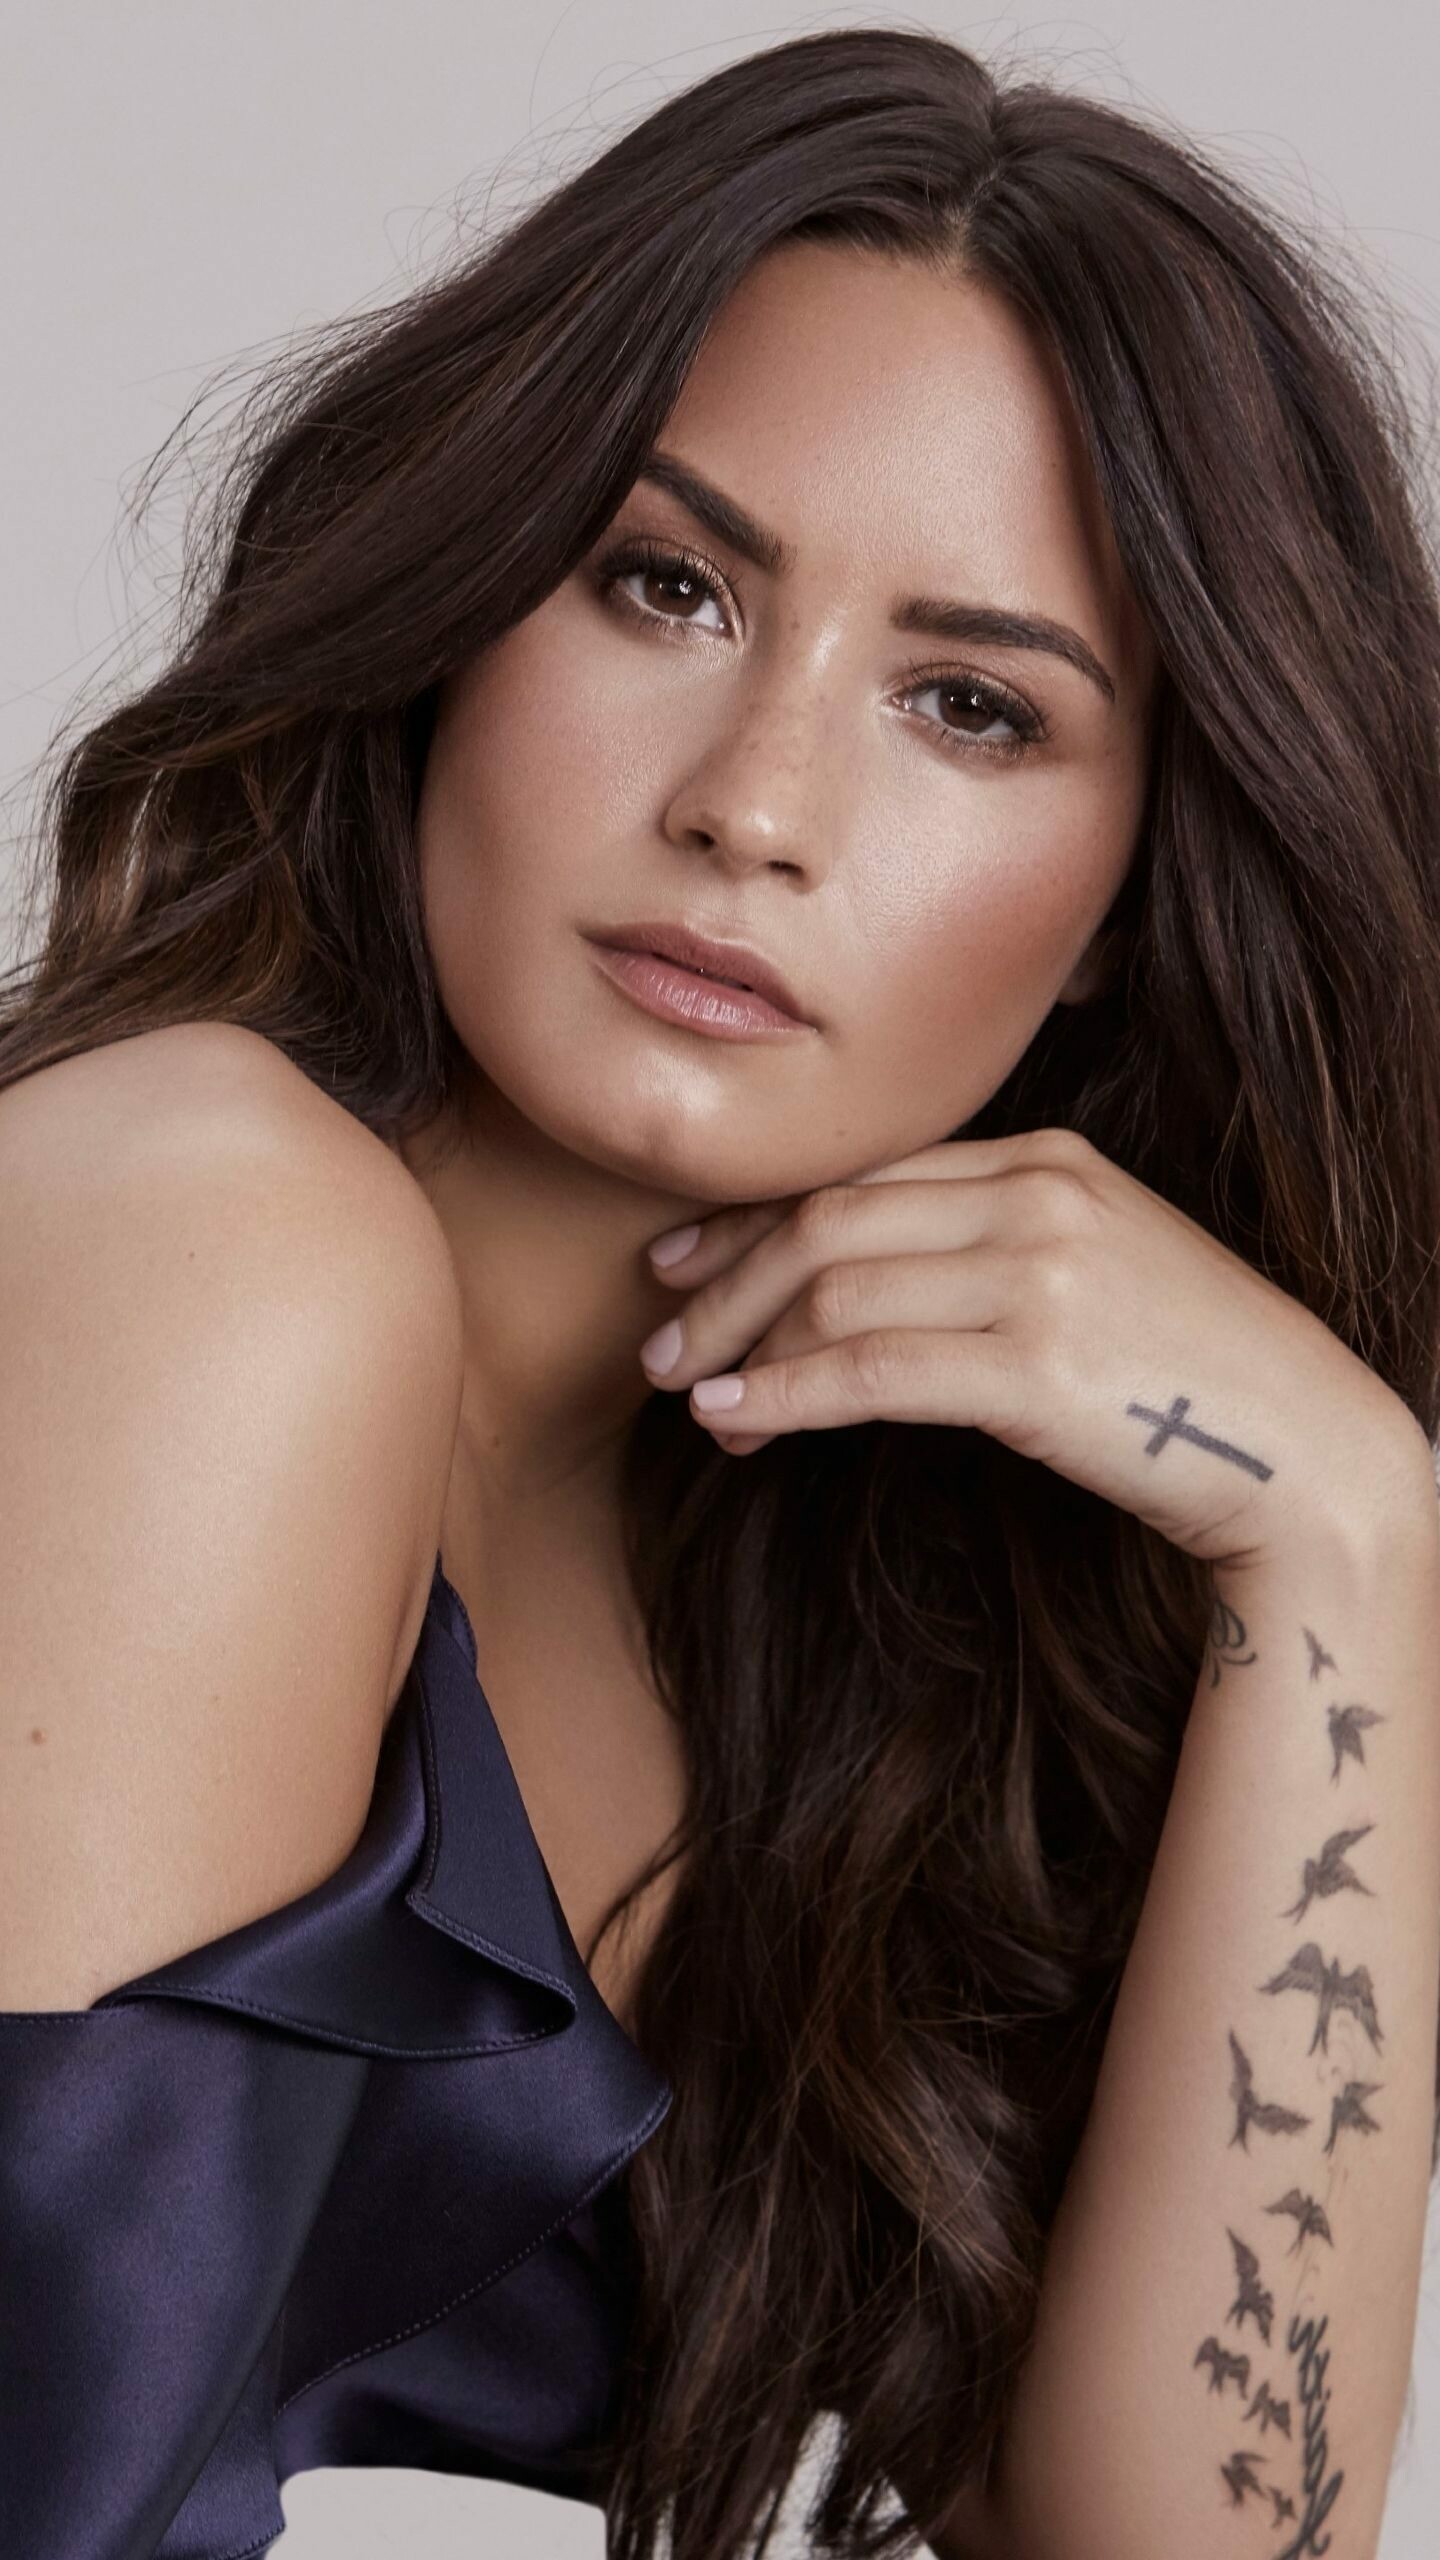 Demi Lovato: "What Other People Say" was released on 4 February 2021 by RCA and Island Records. 1440x2560 HD Background.